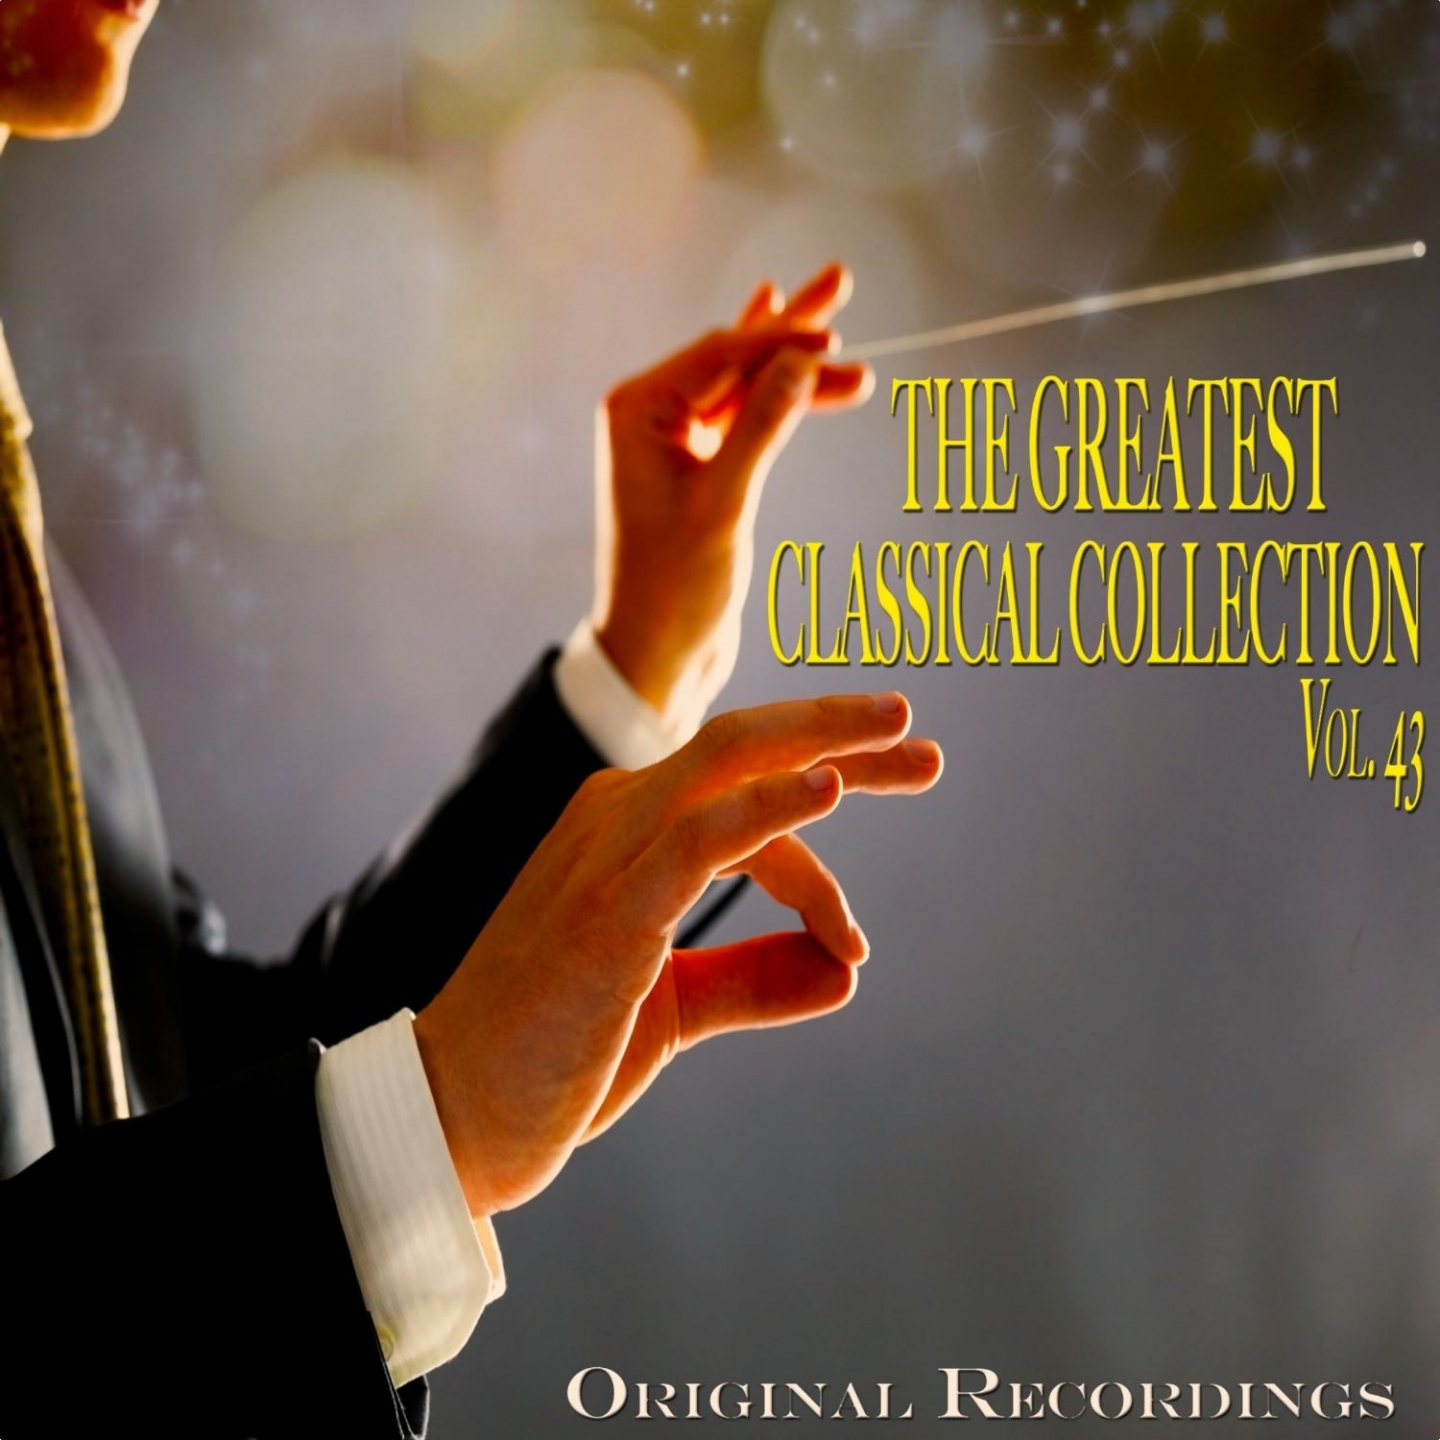 The Greatest Classical Collection Vol. 43